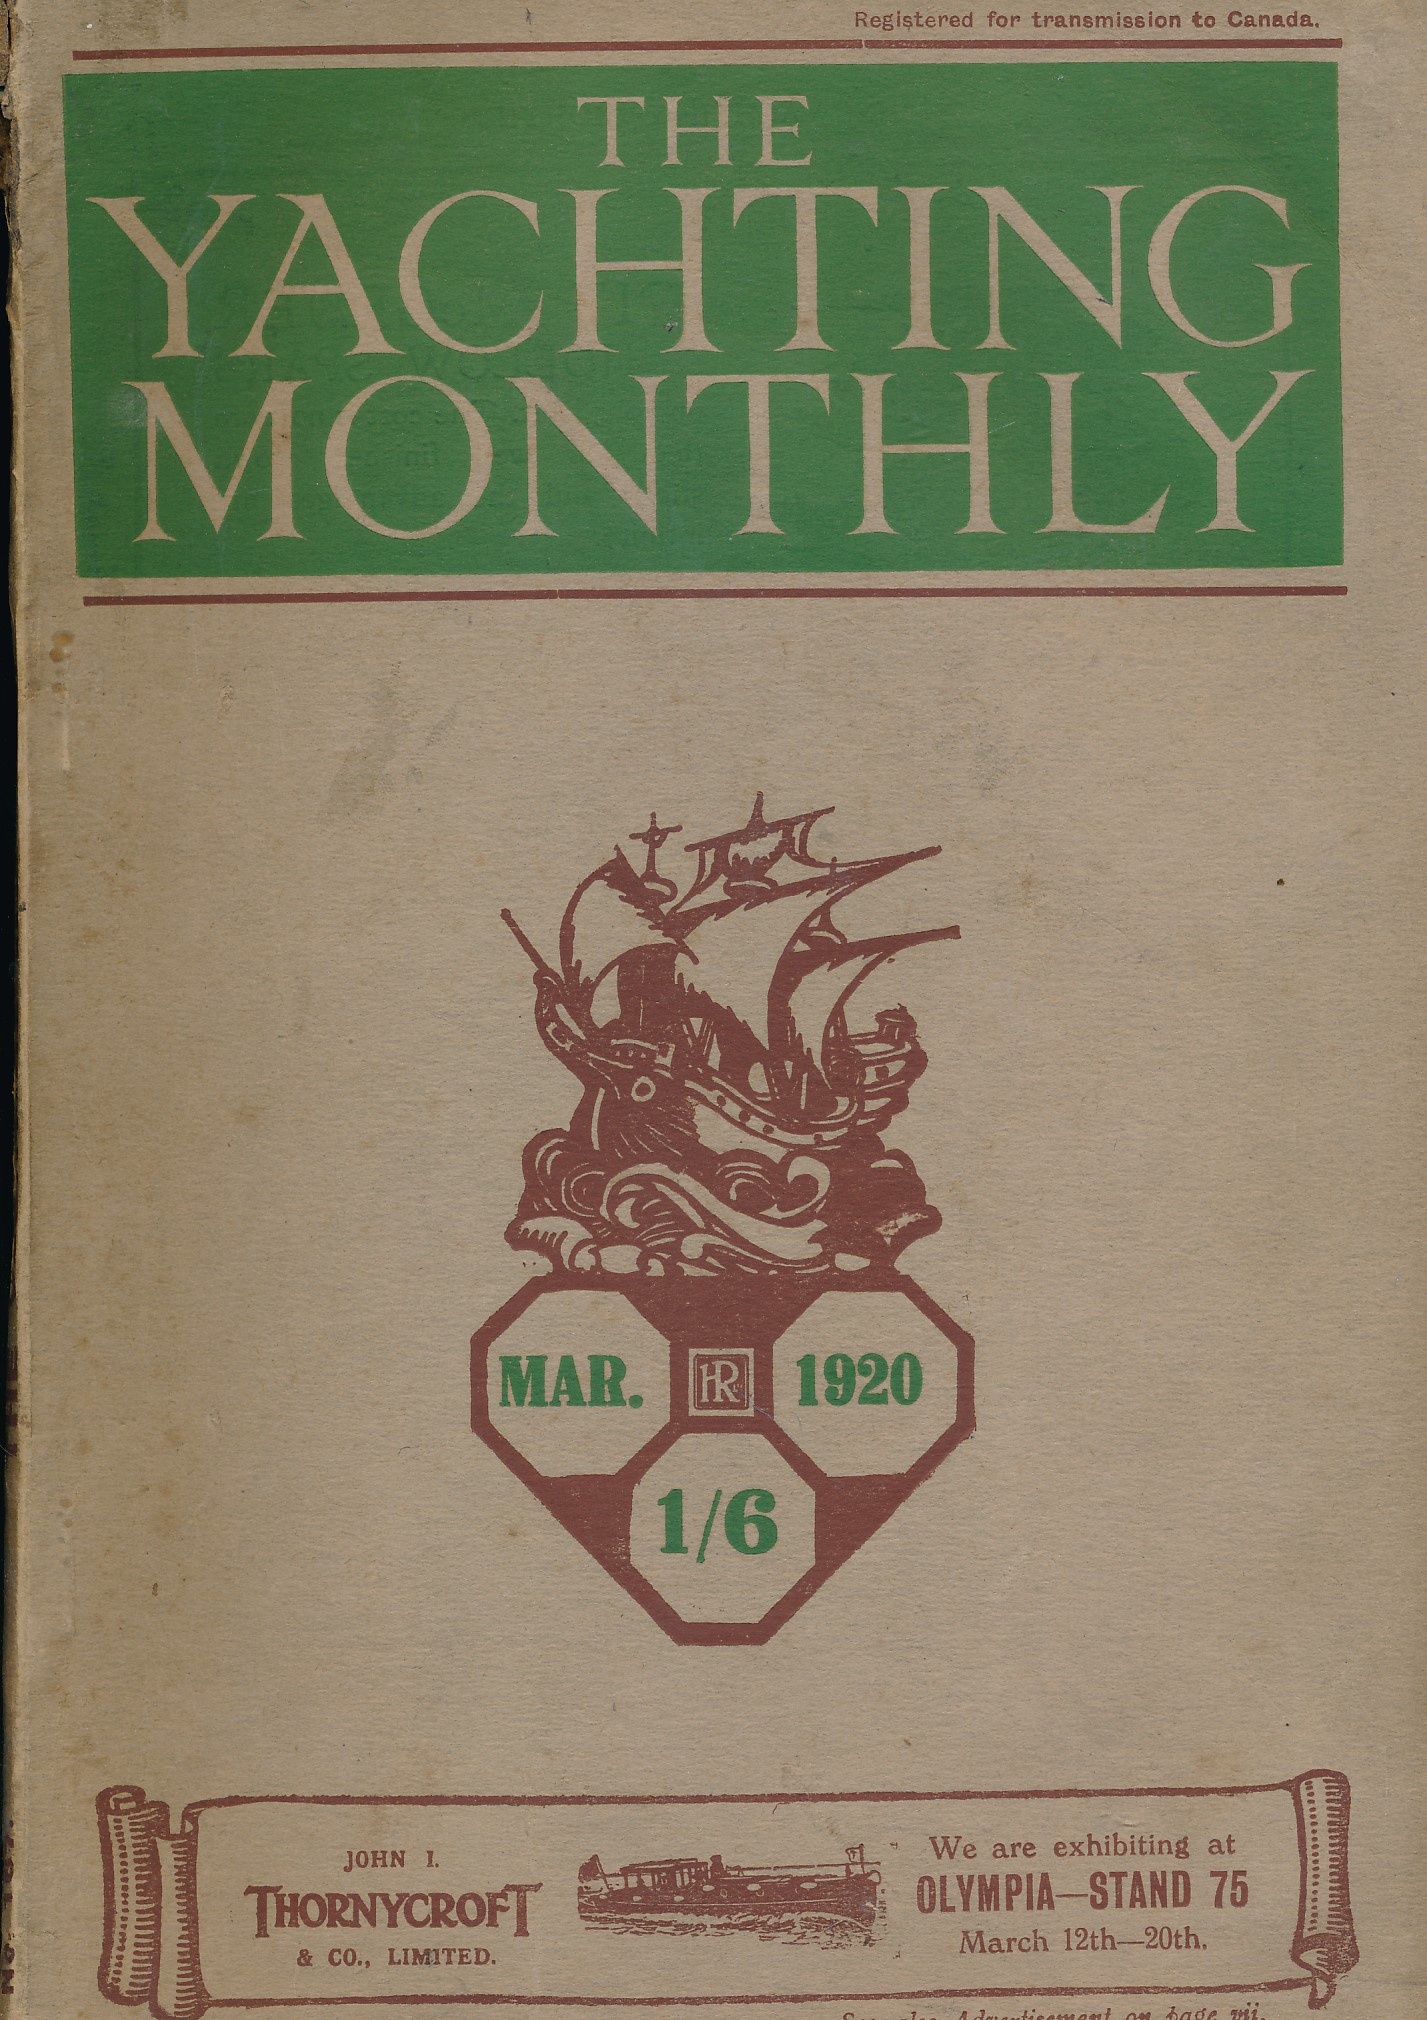 The Yachting Monthly and Magazine of the R.N.V.R.  Volume 167.- Vol. XXVIII.  March, 1920.